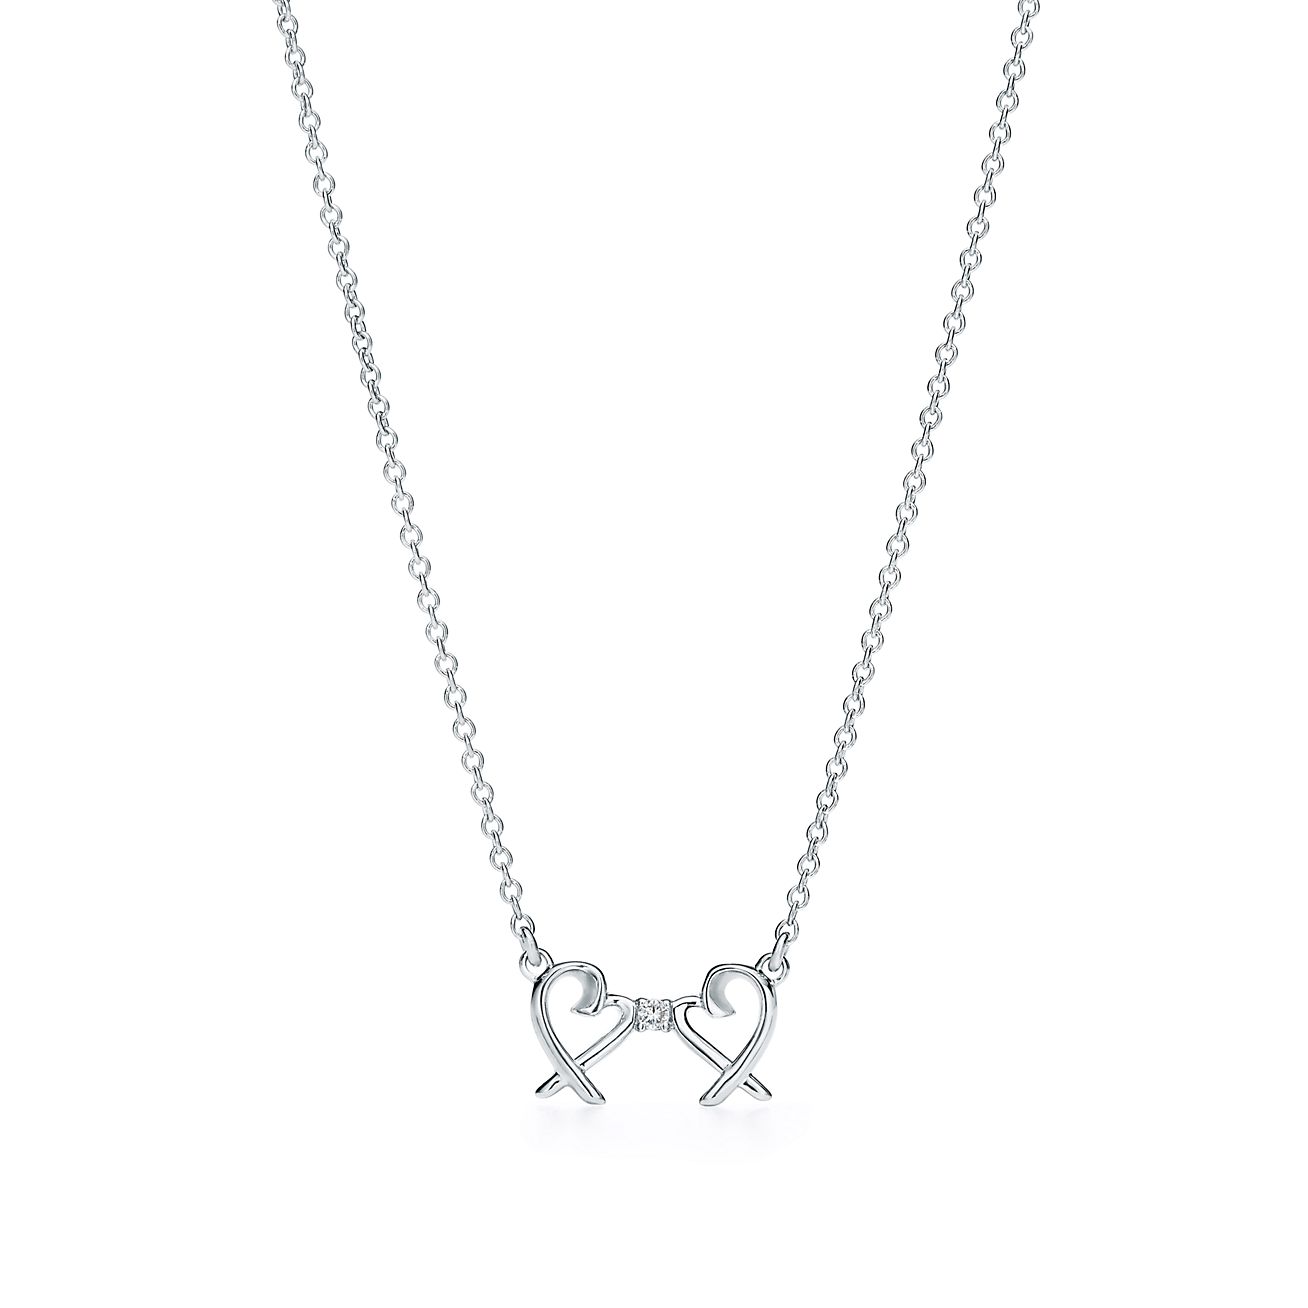 tiffany necklace two hearts